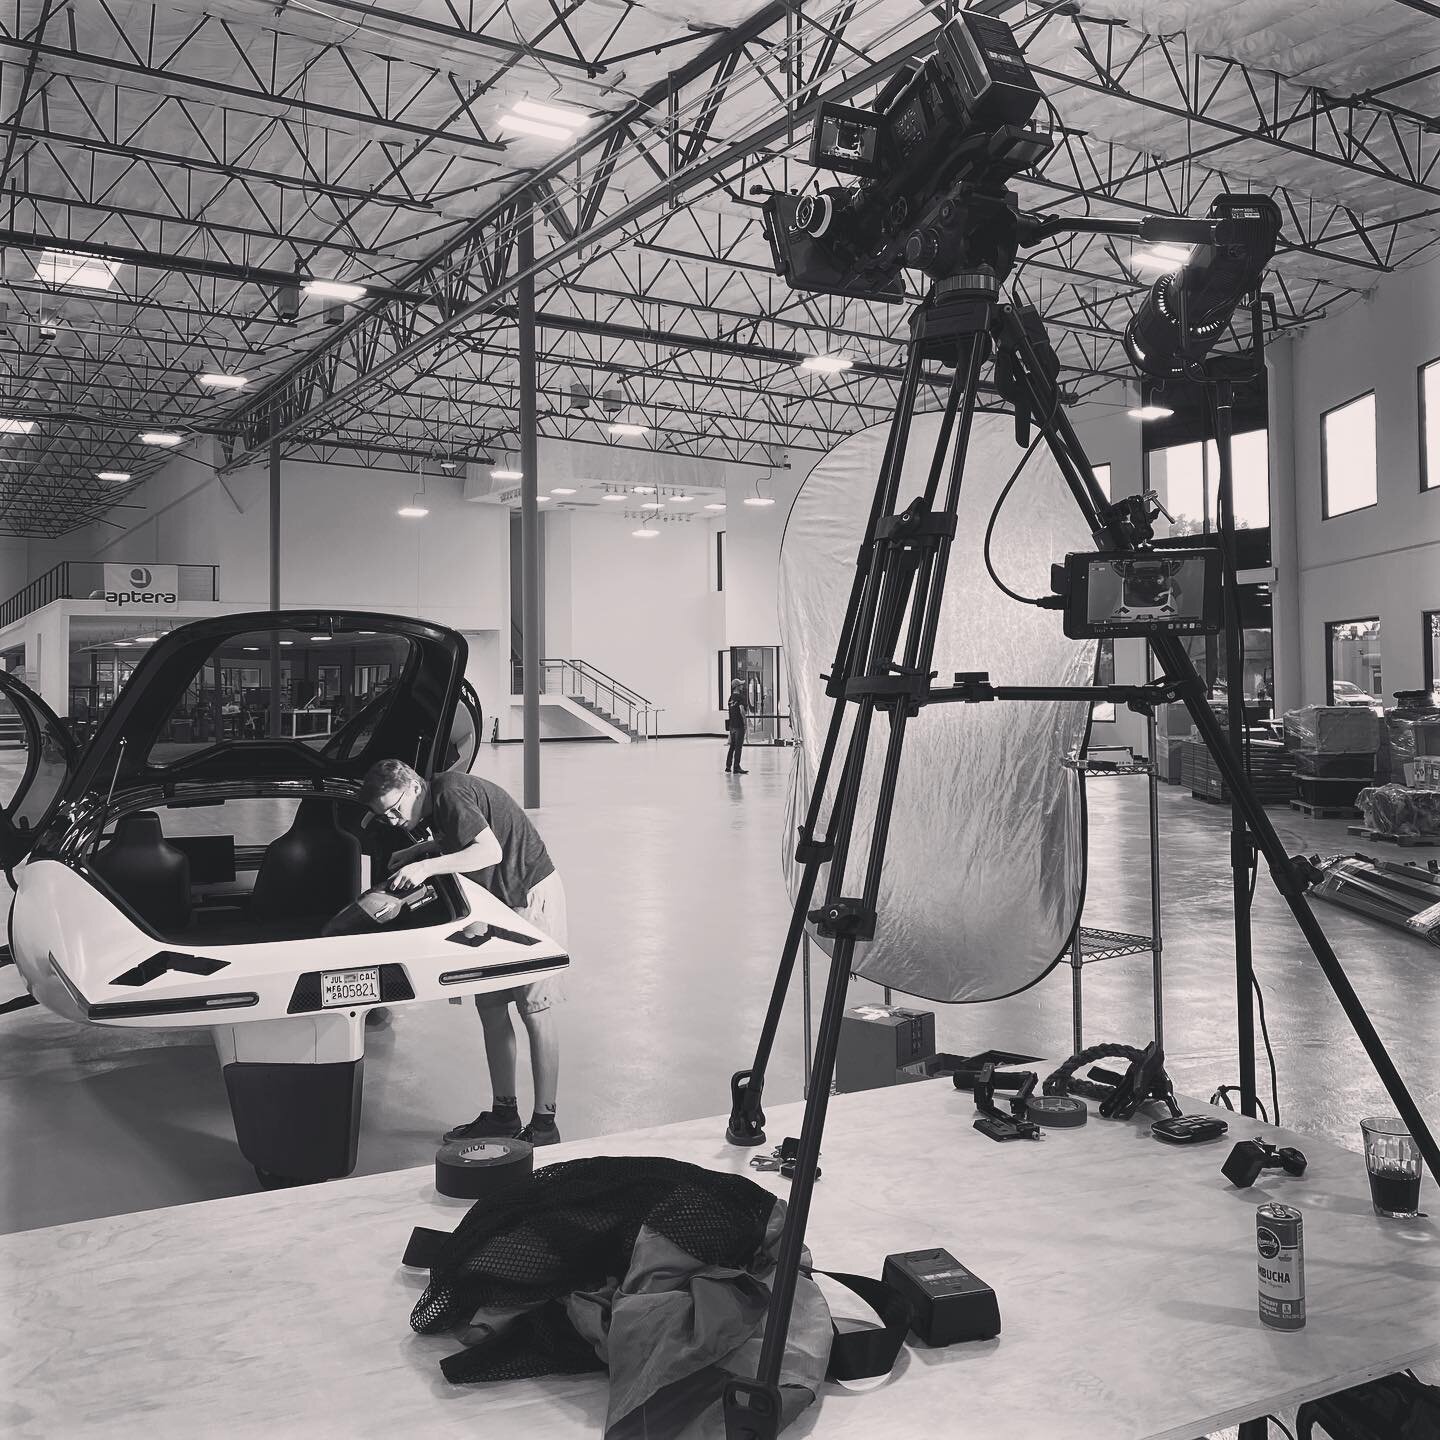 A little #bts for your Wednesday scroll.

New work up for @aptera_motors 

#trunk
#fit
#sev
#stopmotion